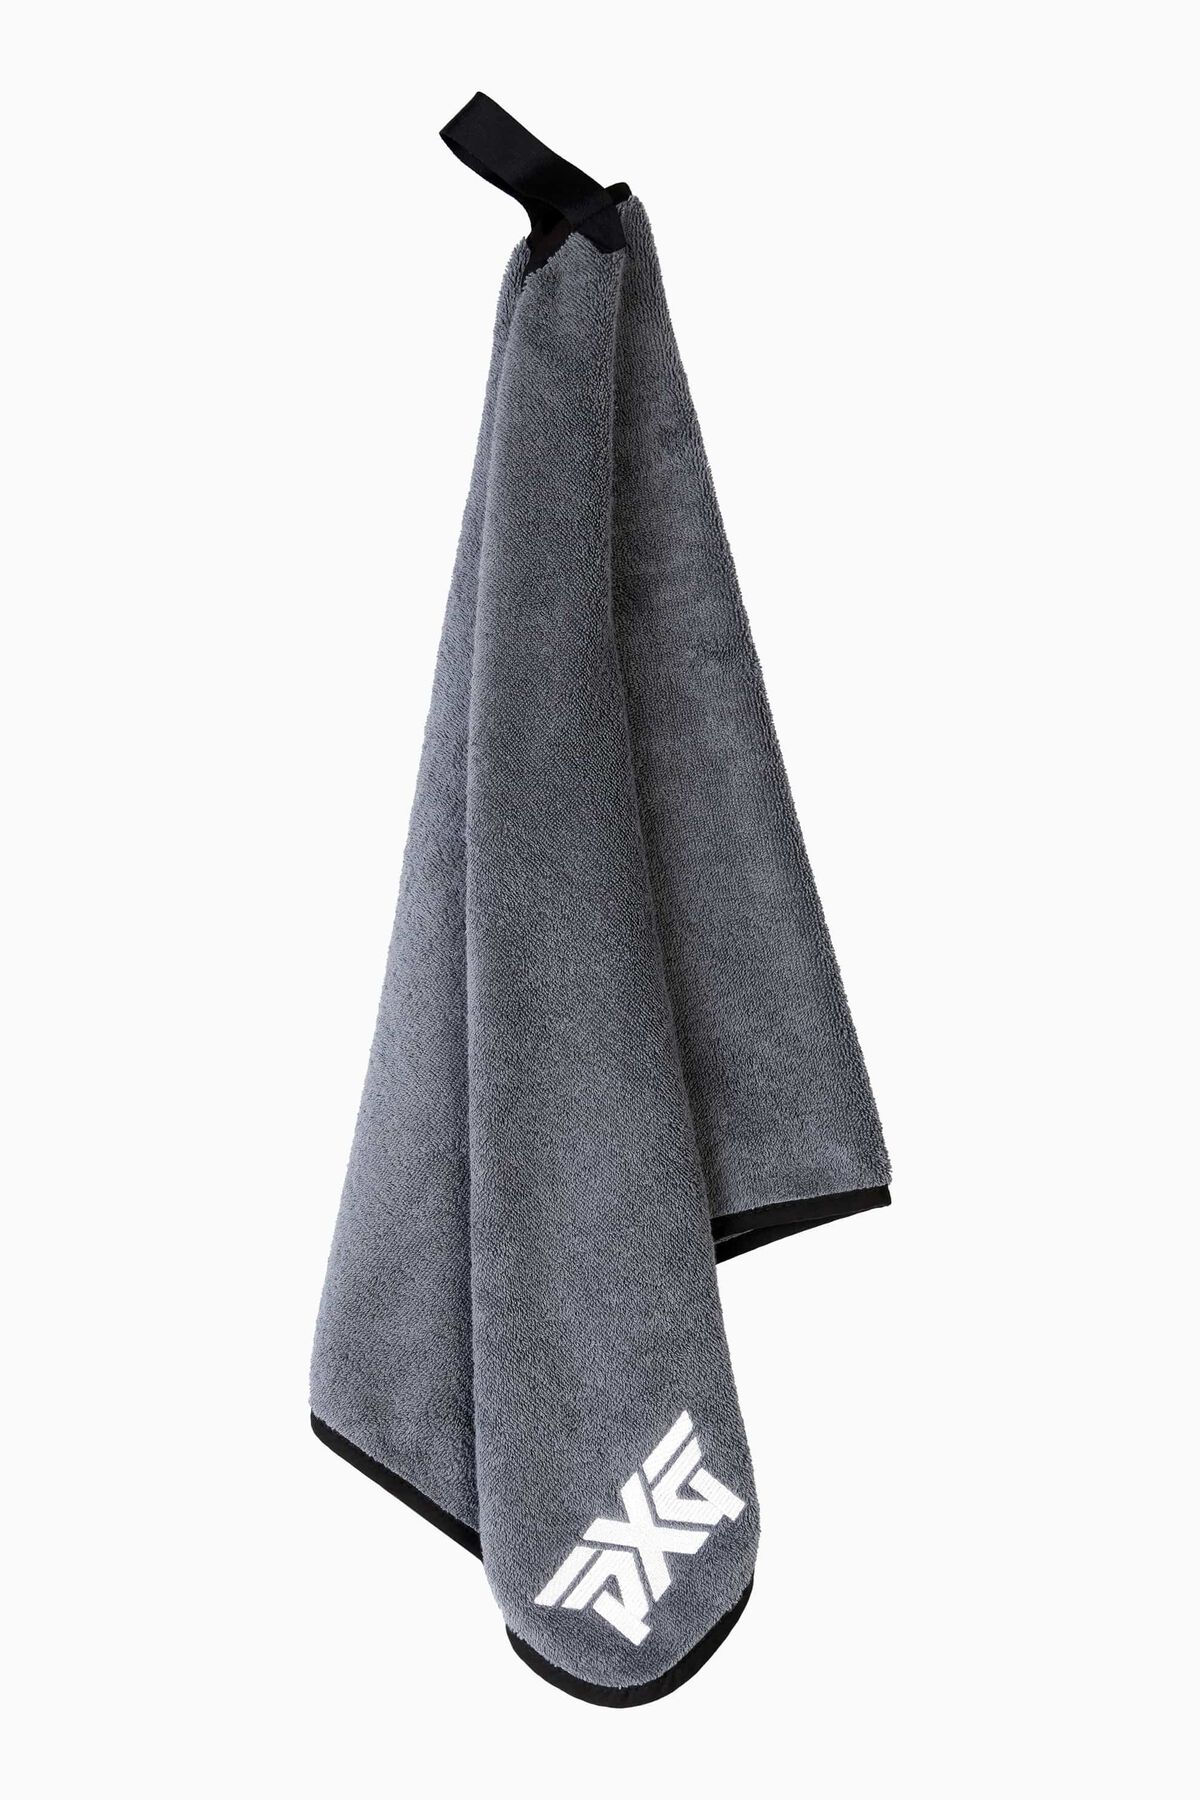 https://www.pxg.com/dw/image/v2/BFXB_PRD/on/demandware.static/-/Sites-pxg-master/default/dw5f5d74b9/images/hi-res/accessories/on%20the%20course/towels/Terry%20Cloth%20Players%20Towel/Tour-Players-Terry-Towel-Listing-2-HiRes-50.jpg?sw=1200